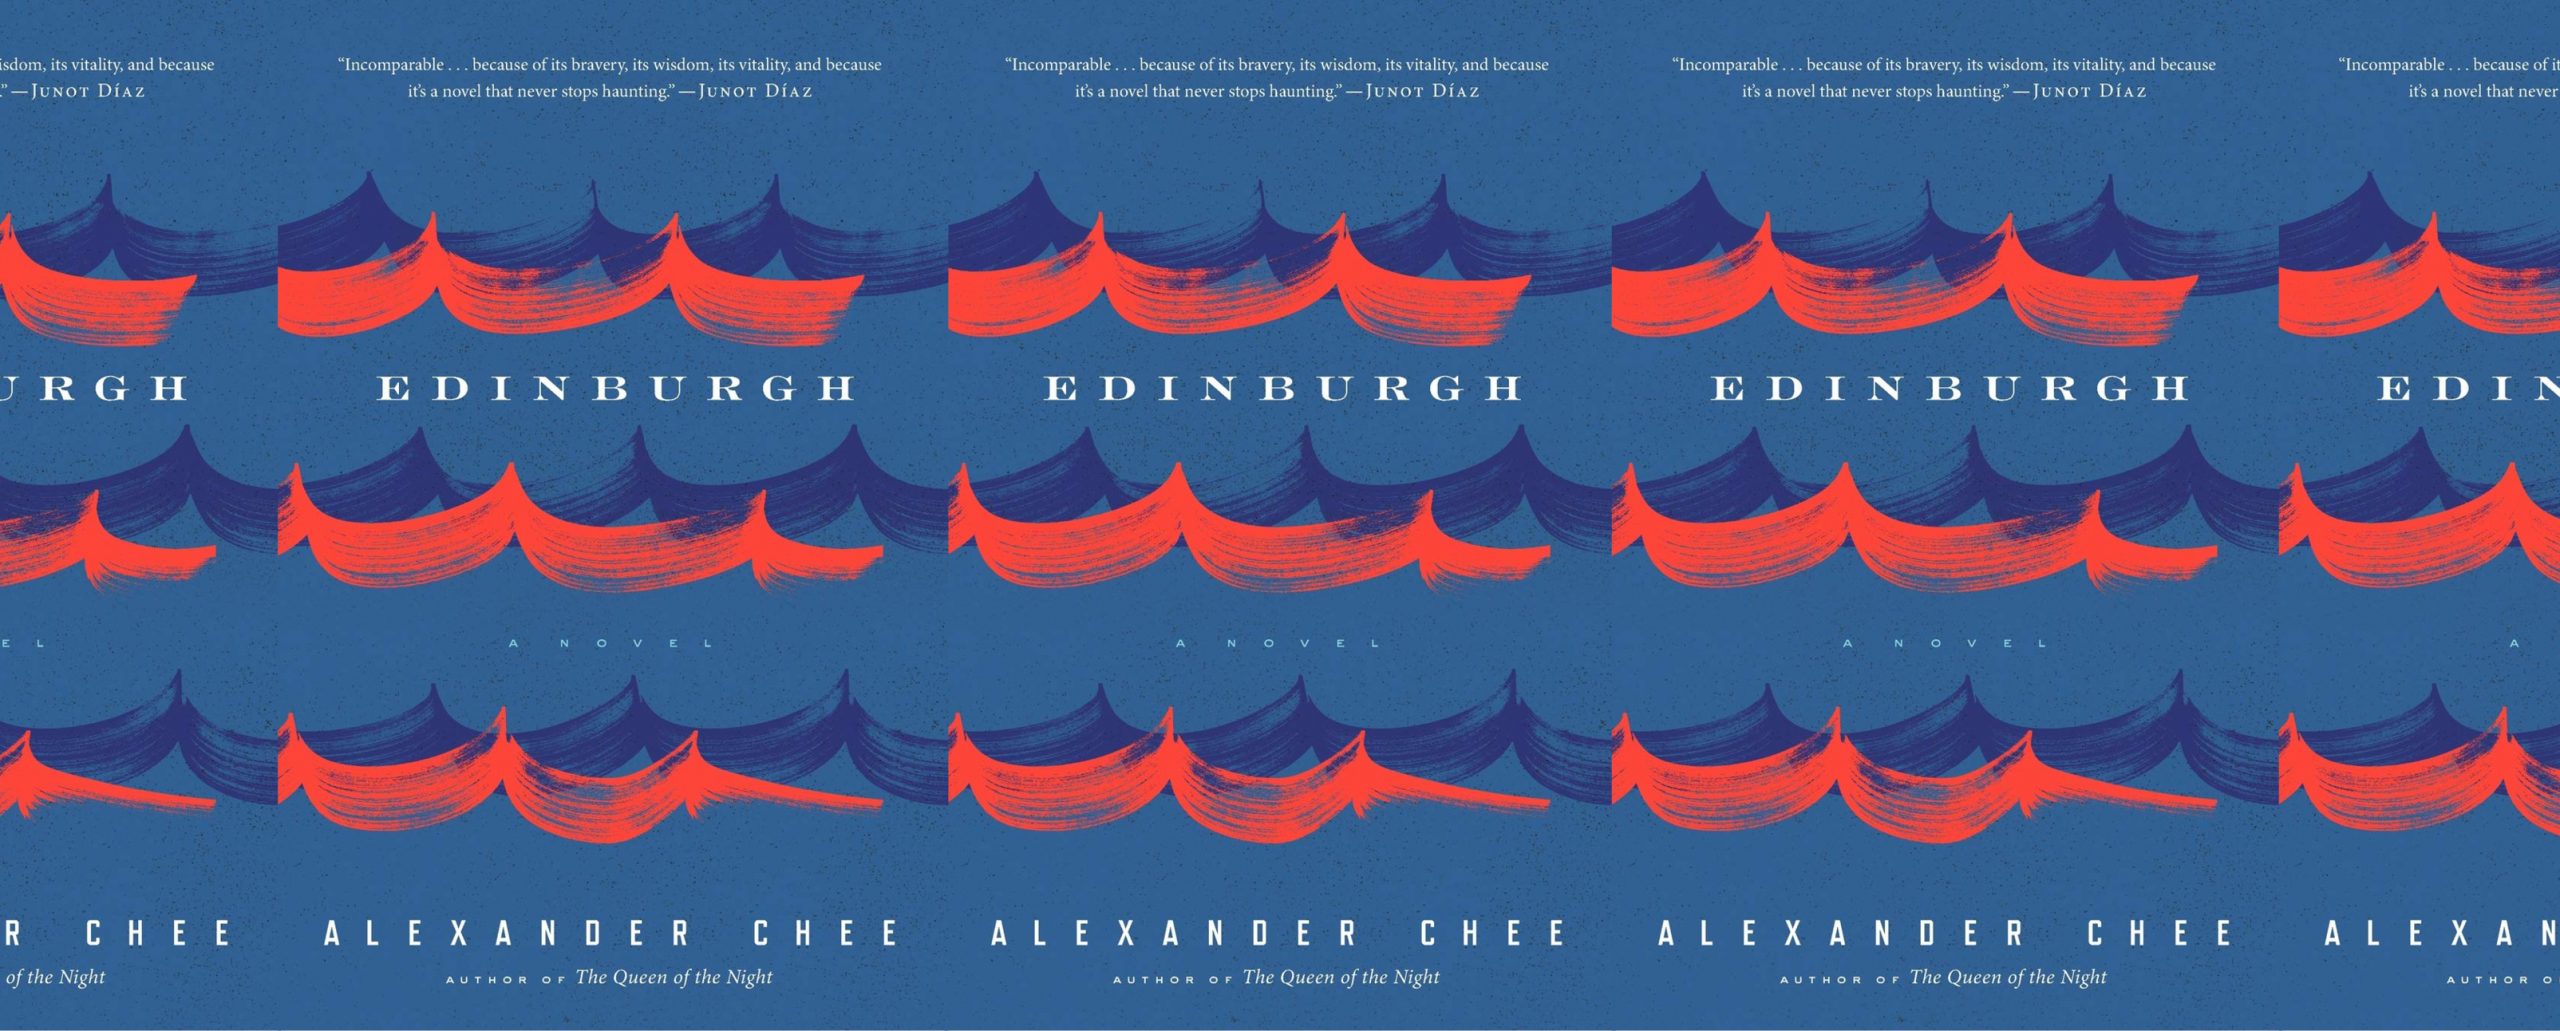 the cover for Edinburgh featuring red and blue waves against a blue background